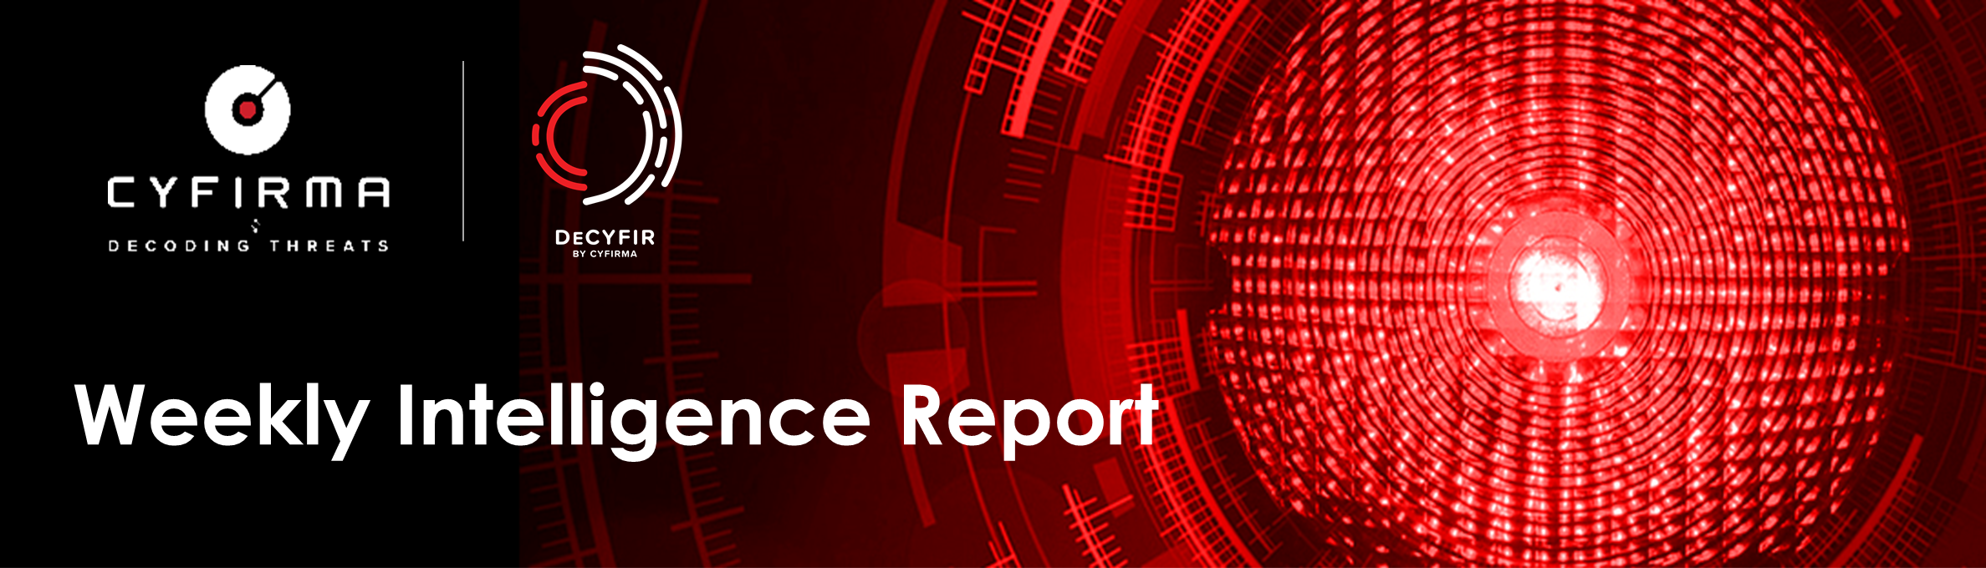 Weekly Cyber-Intelligence Report – 8 May 2021